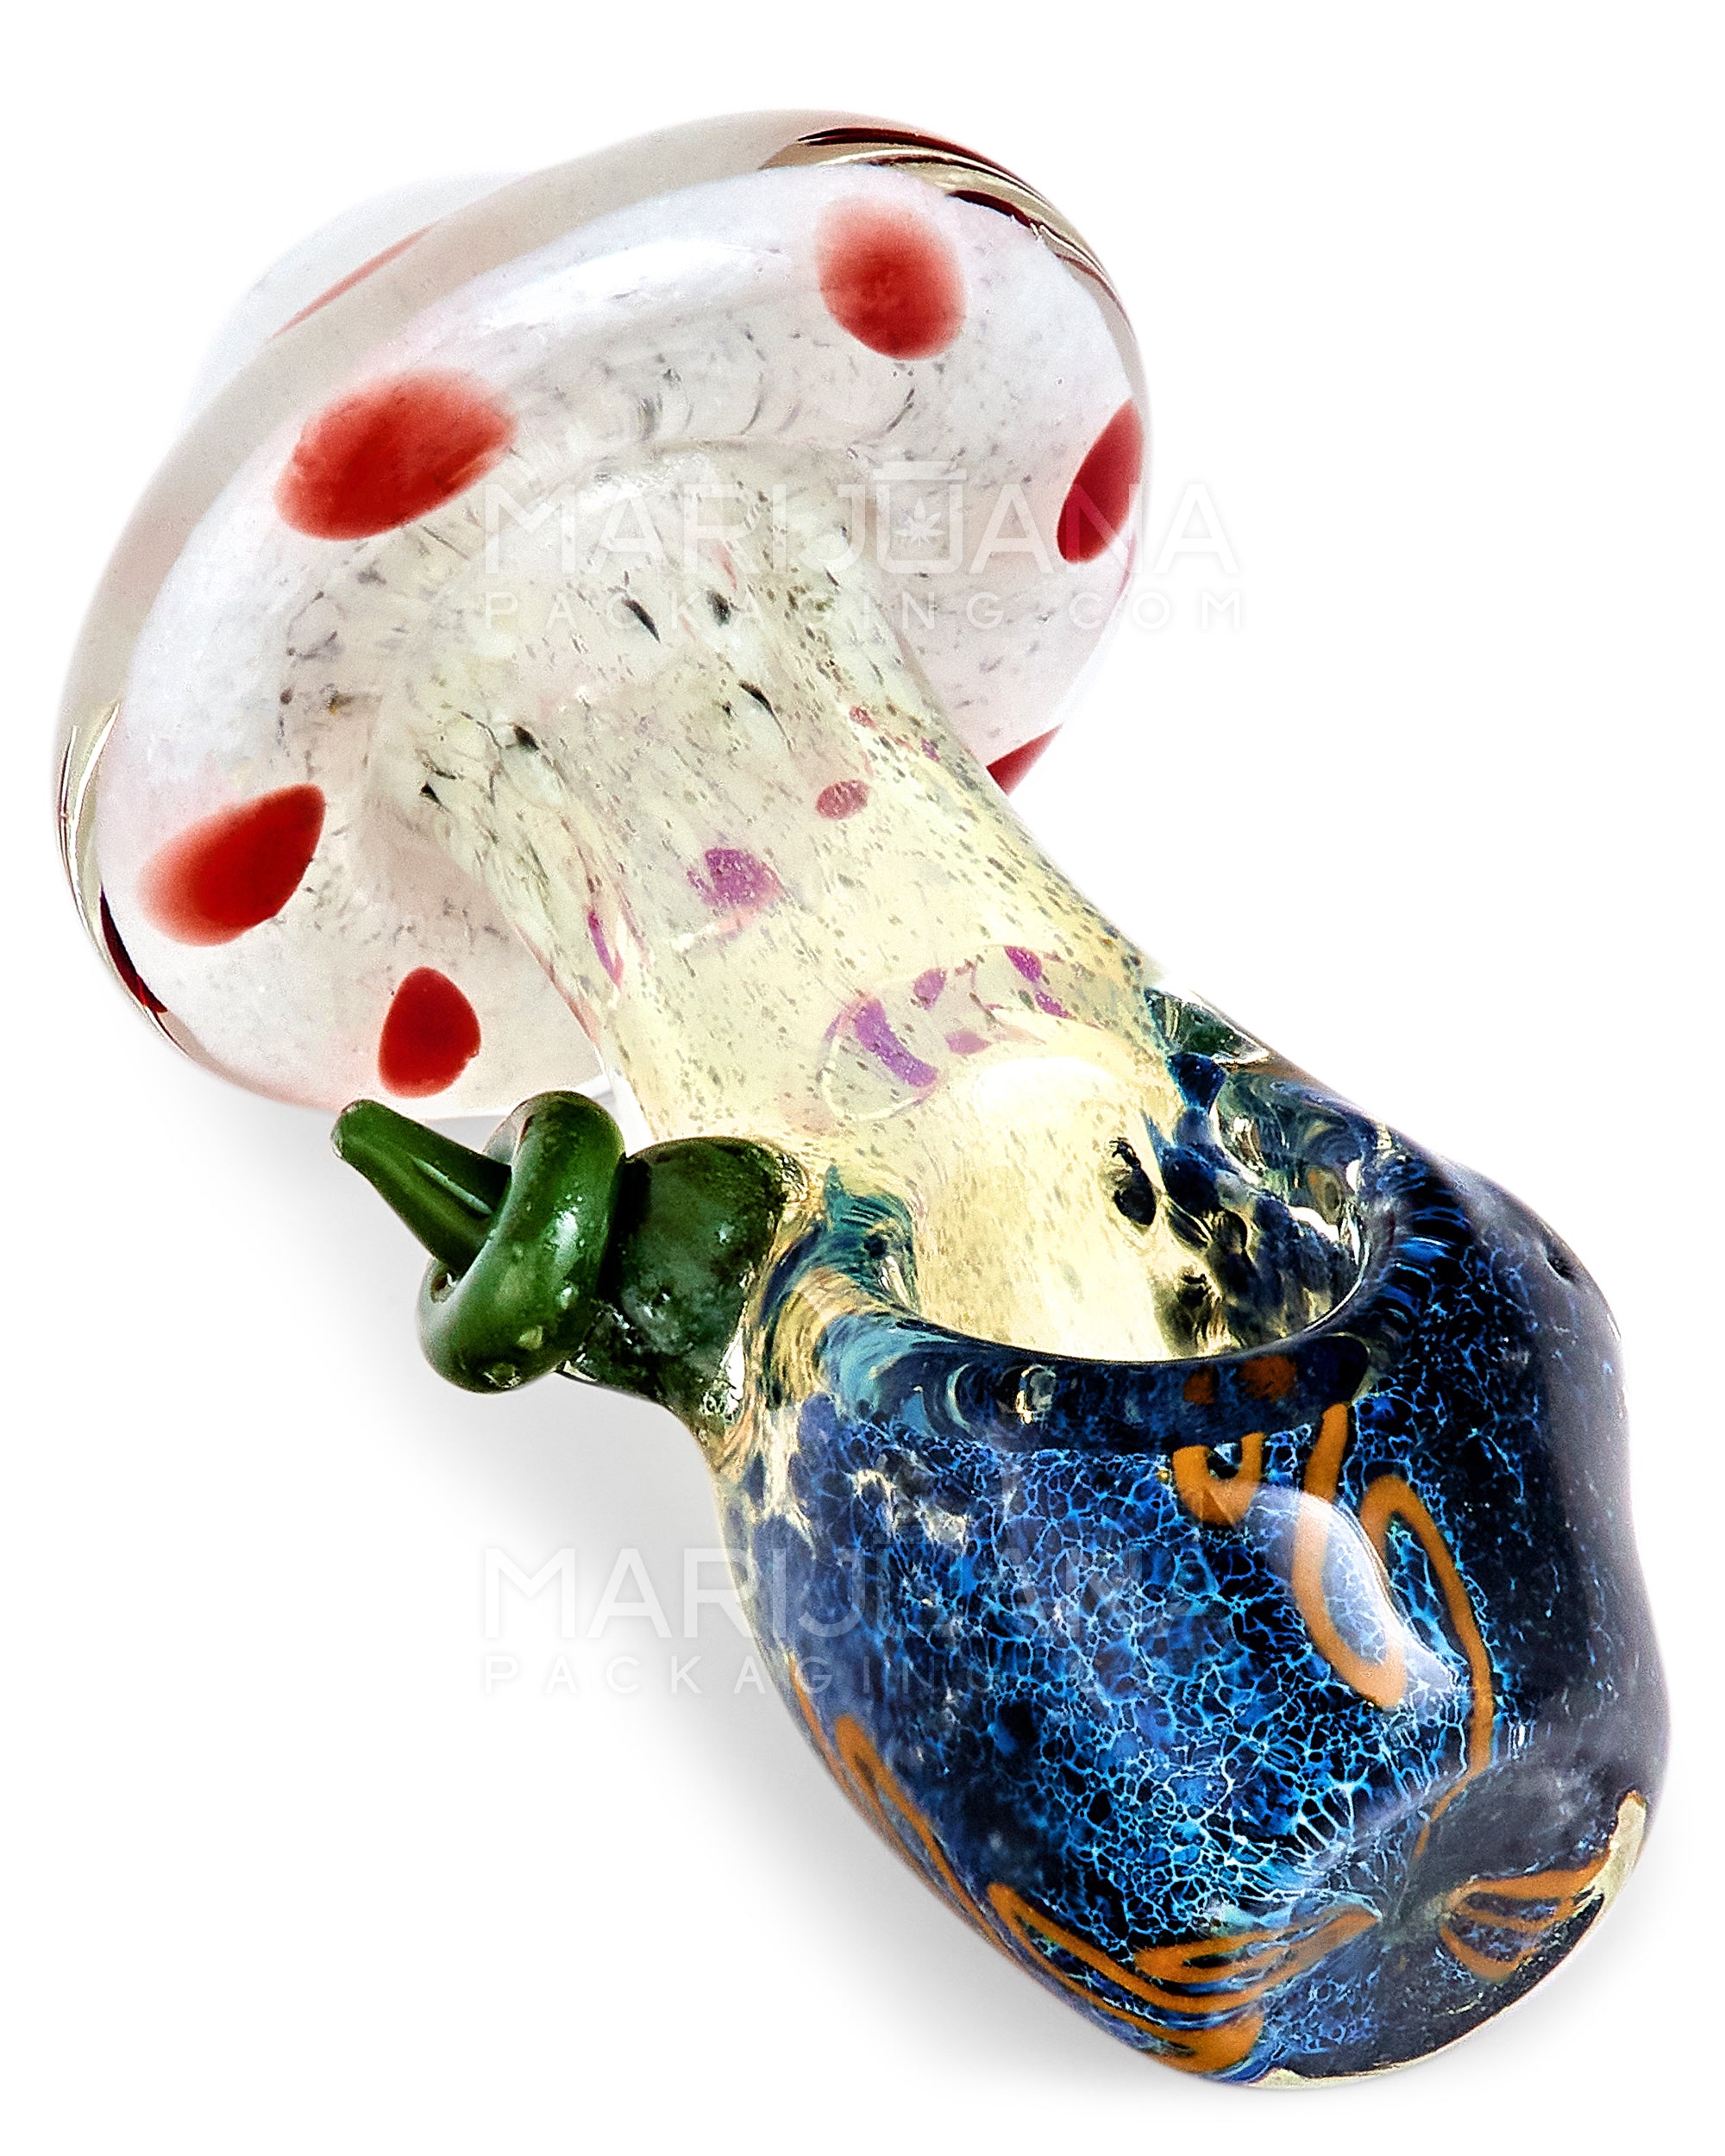 Frit & Multi Fumed Mushroom Hand Pipe w/ Ribboning & Glass Handle | 4in Long - Glass - Assorted - 10